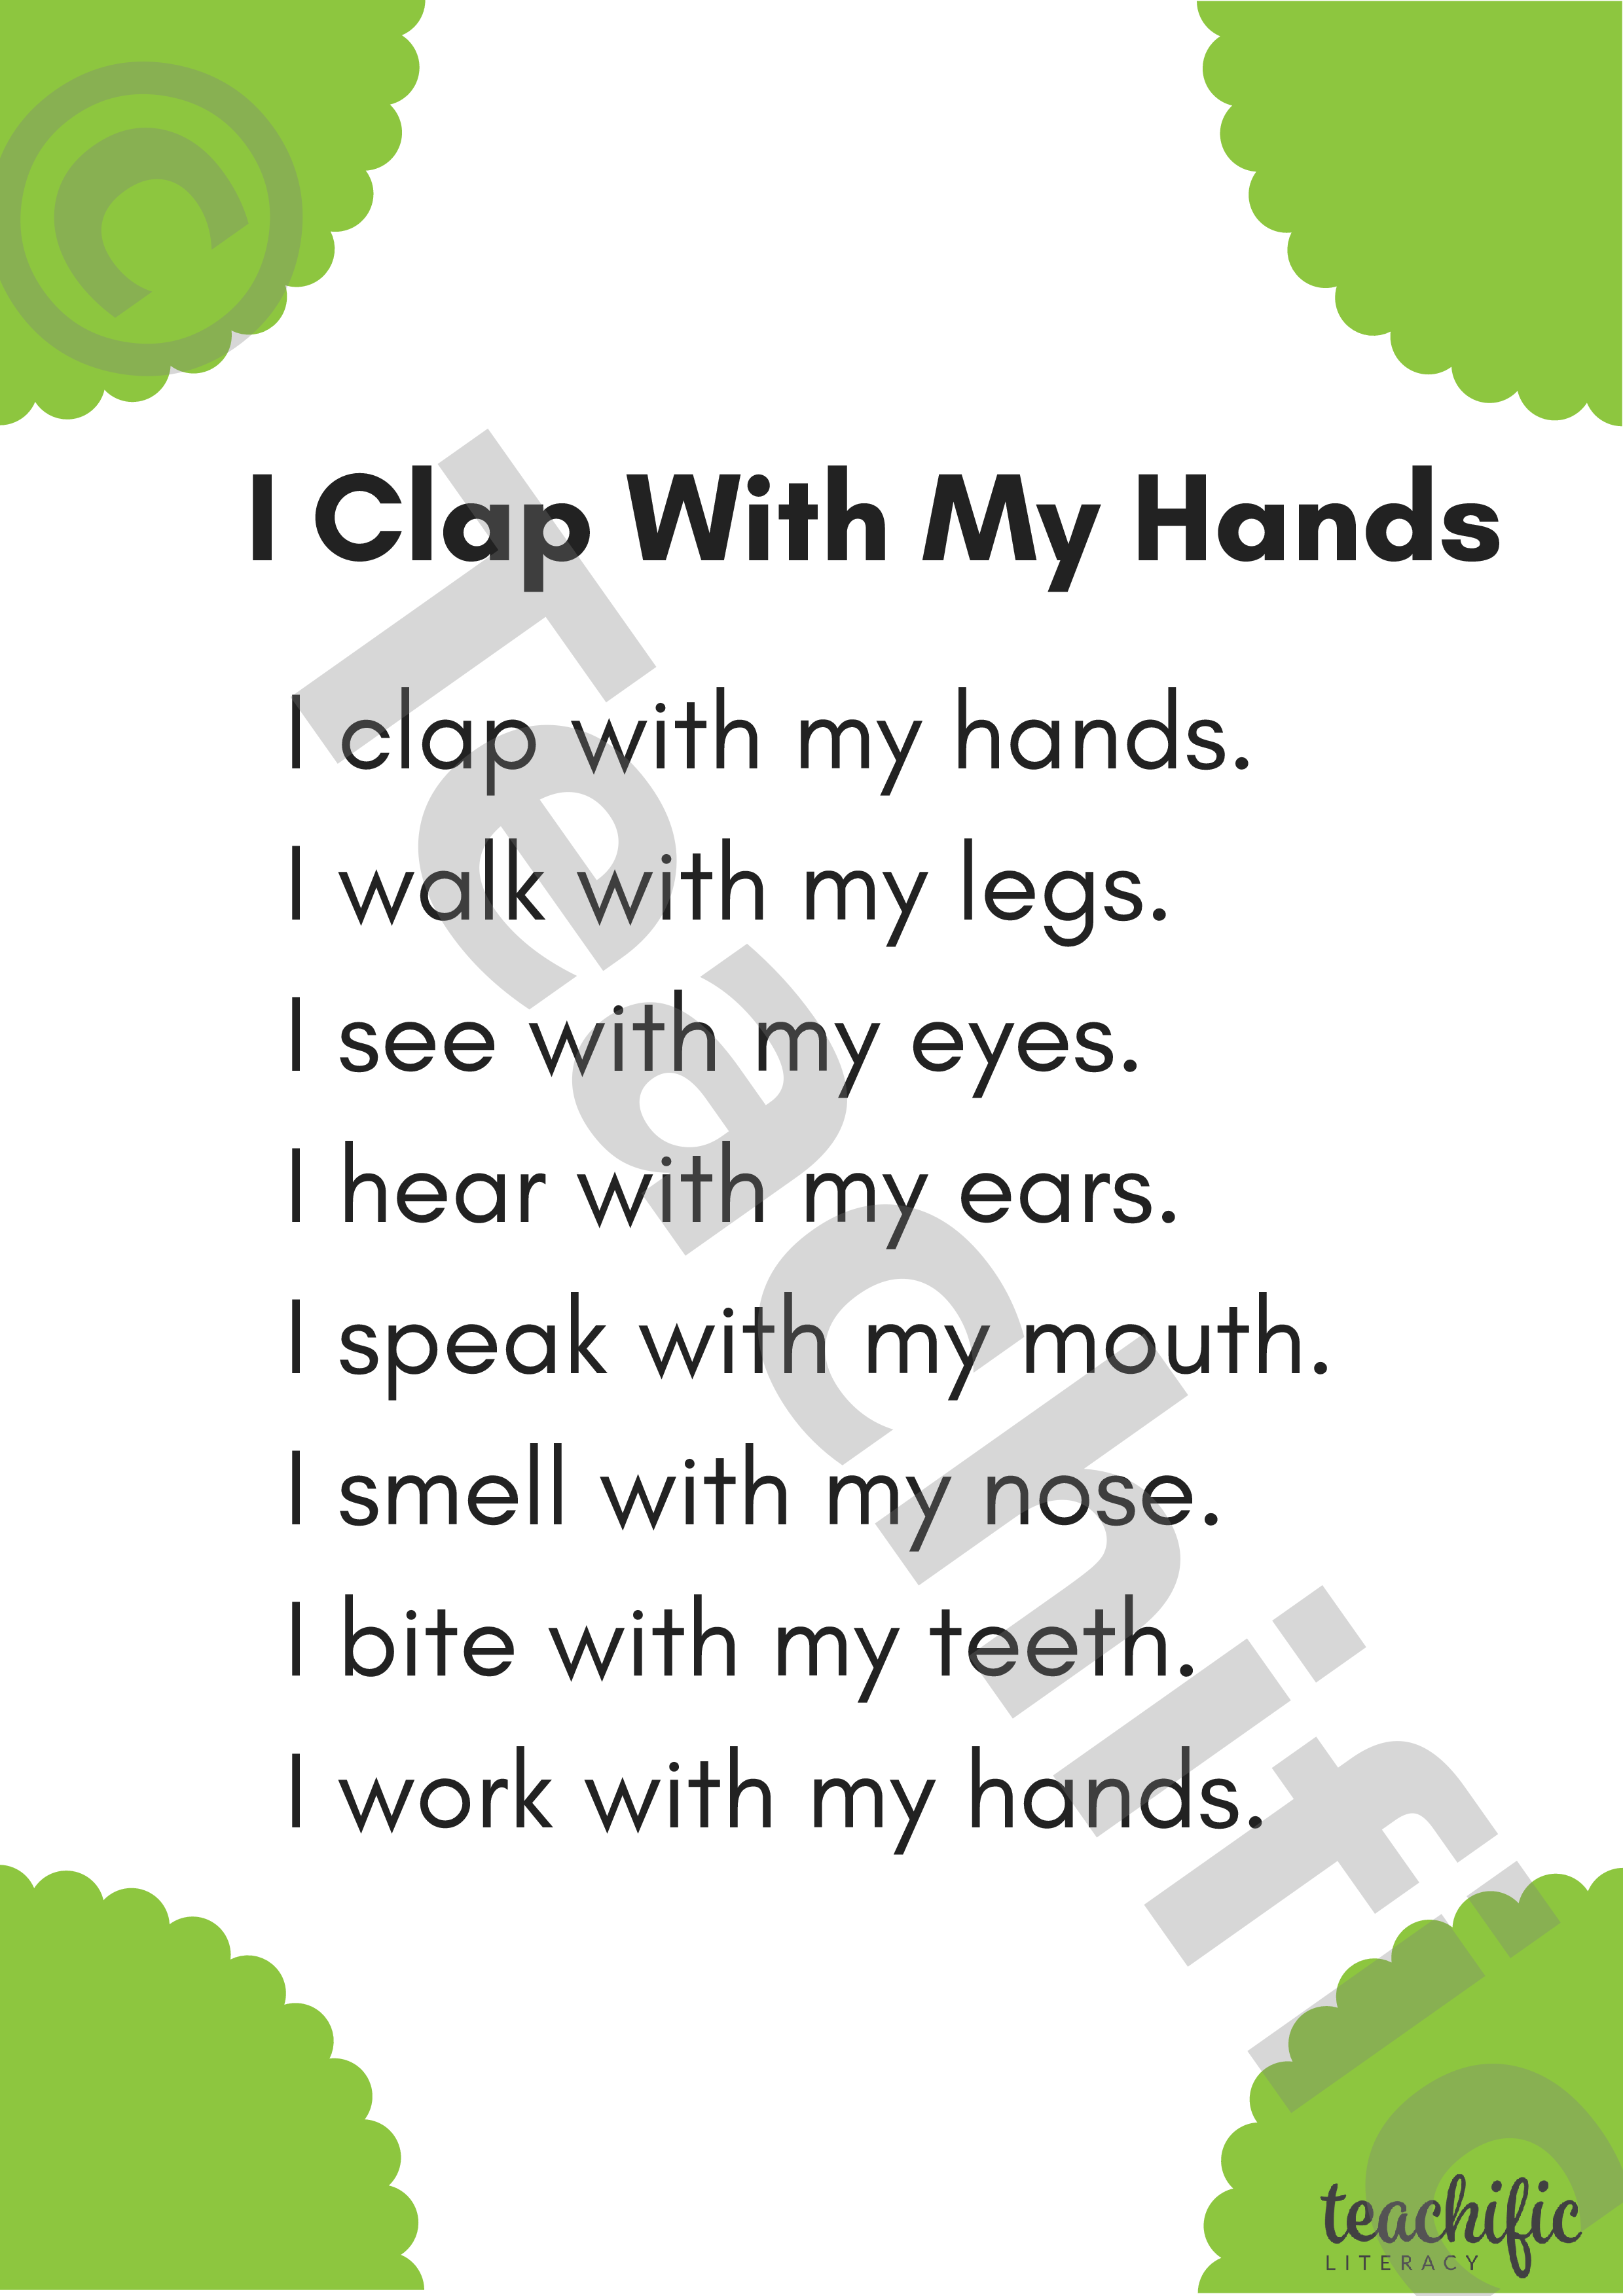 Poems K-2: I Clap With My Hands | Teachific